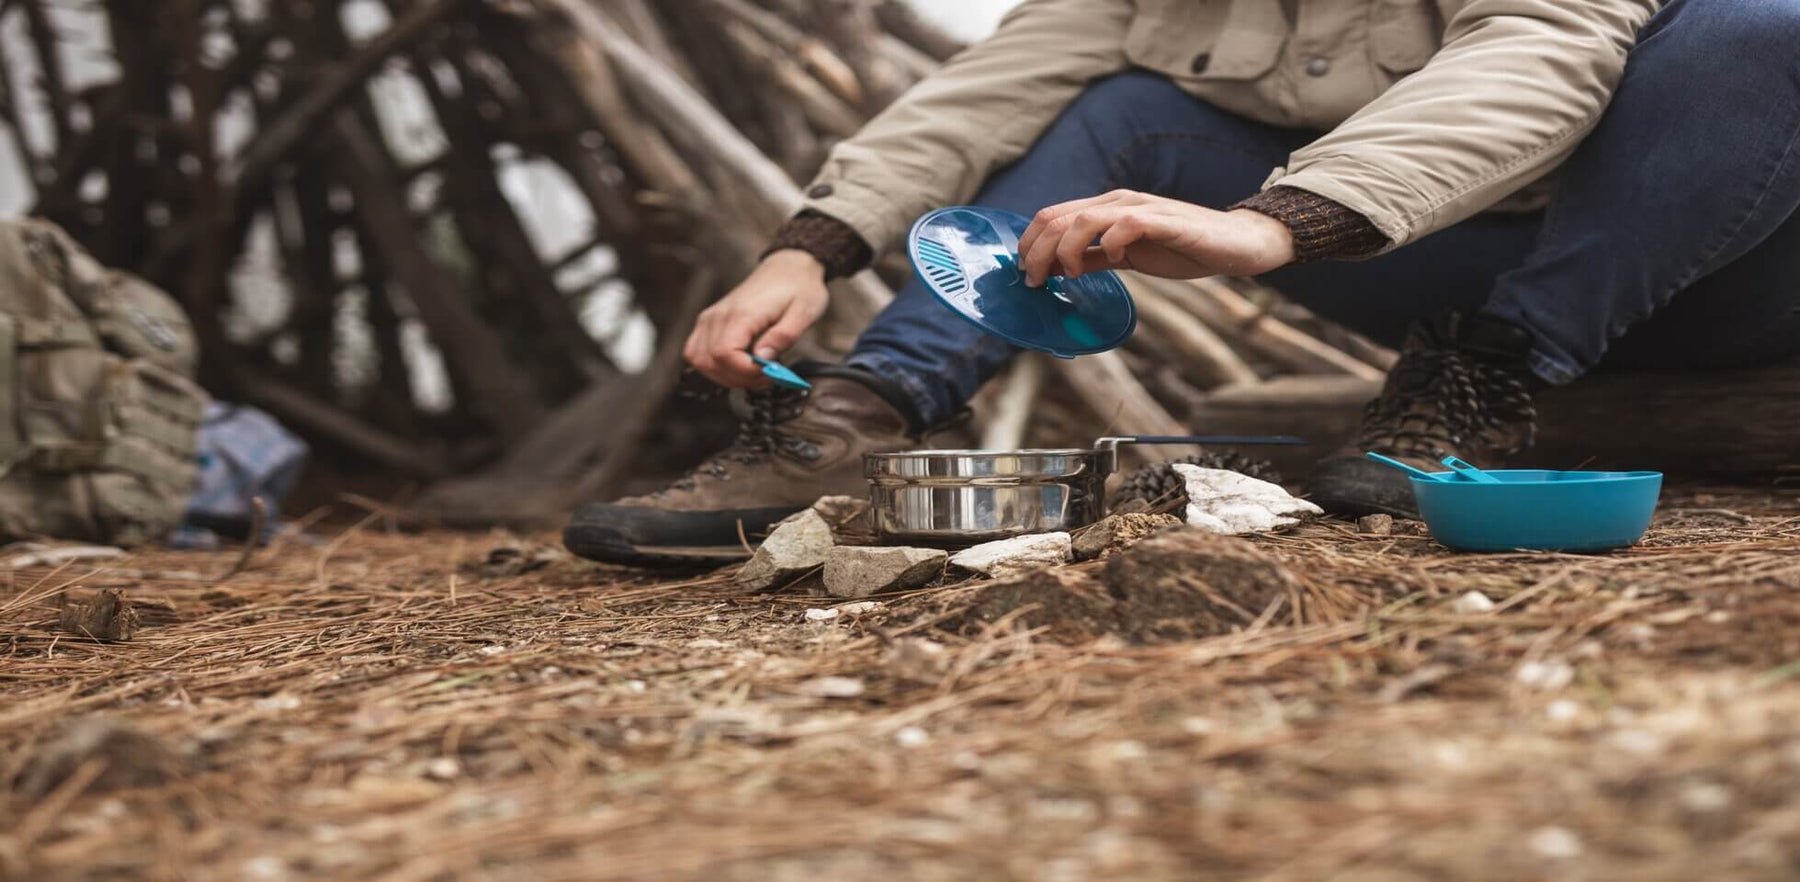 Essential tips for outdoor survival